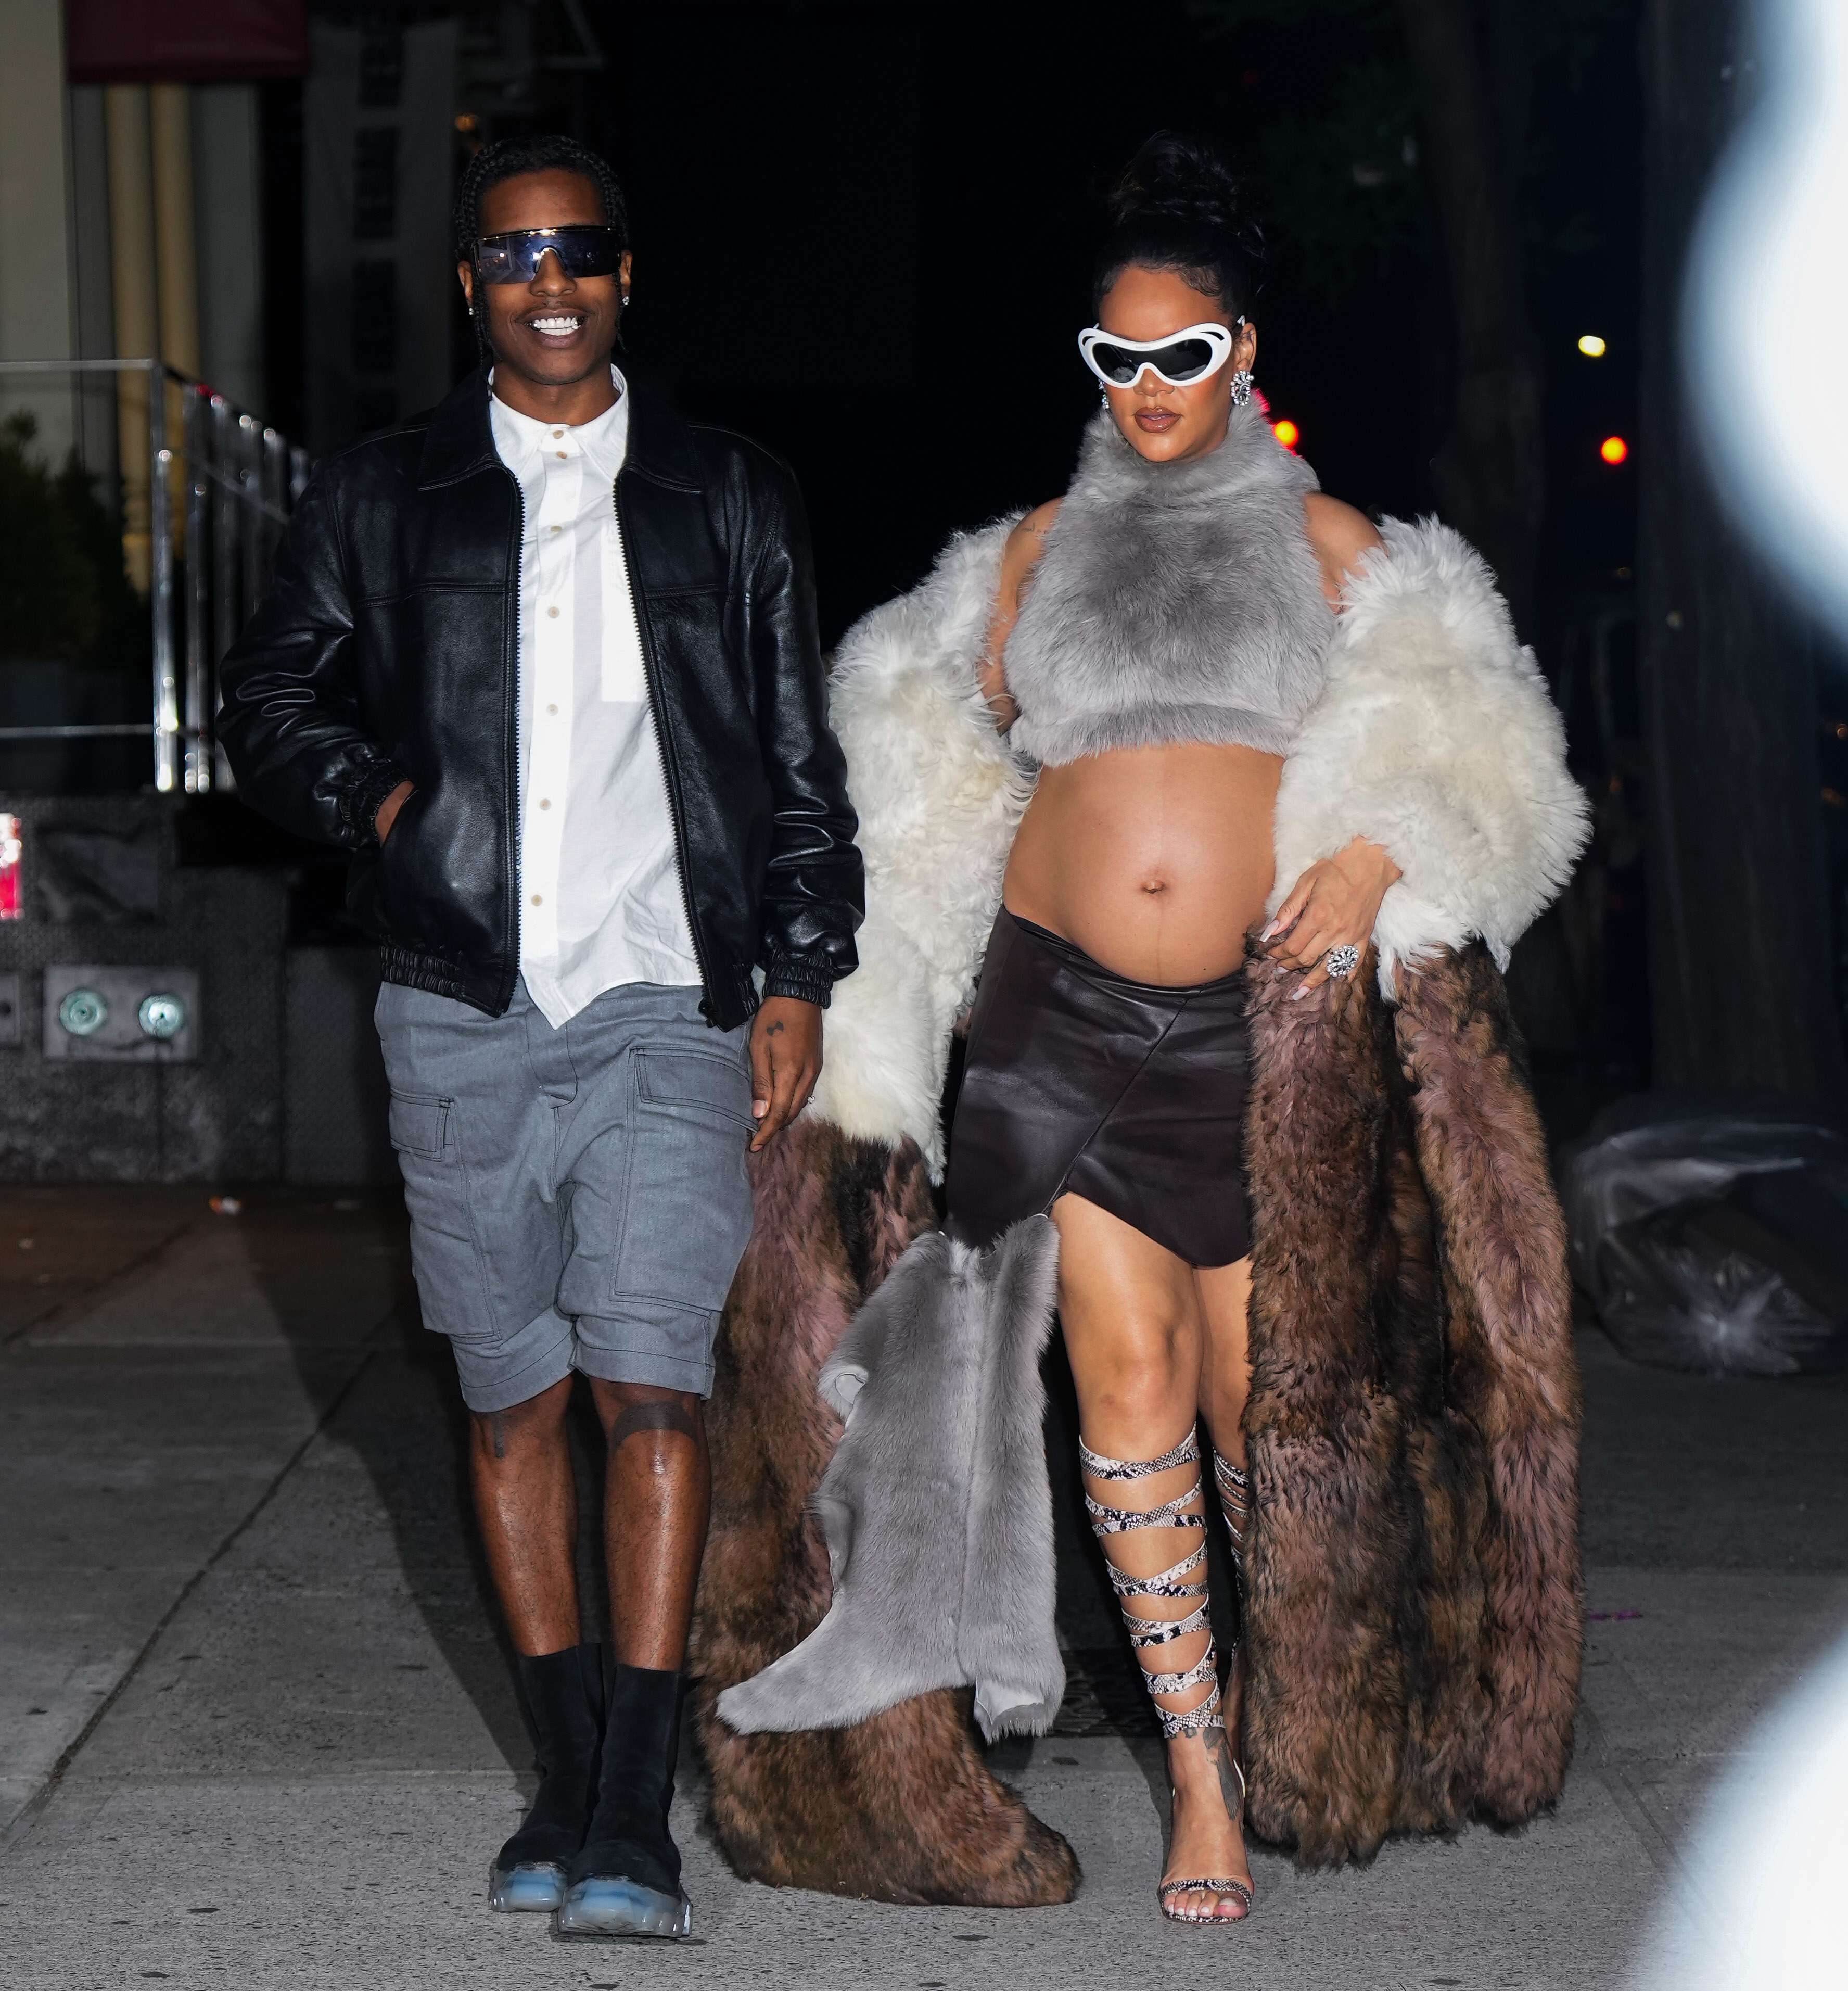 A$AP Rocky and Rihanna walking down the sidewalk at night. Rihanna is wearing a fur crop top and leather skirt with a fur coat. Rocky is wearing a dress shirt, shirts, and a jacket